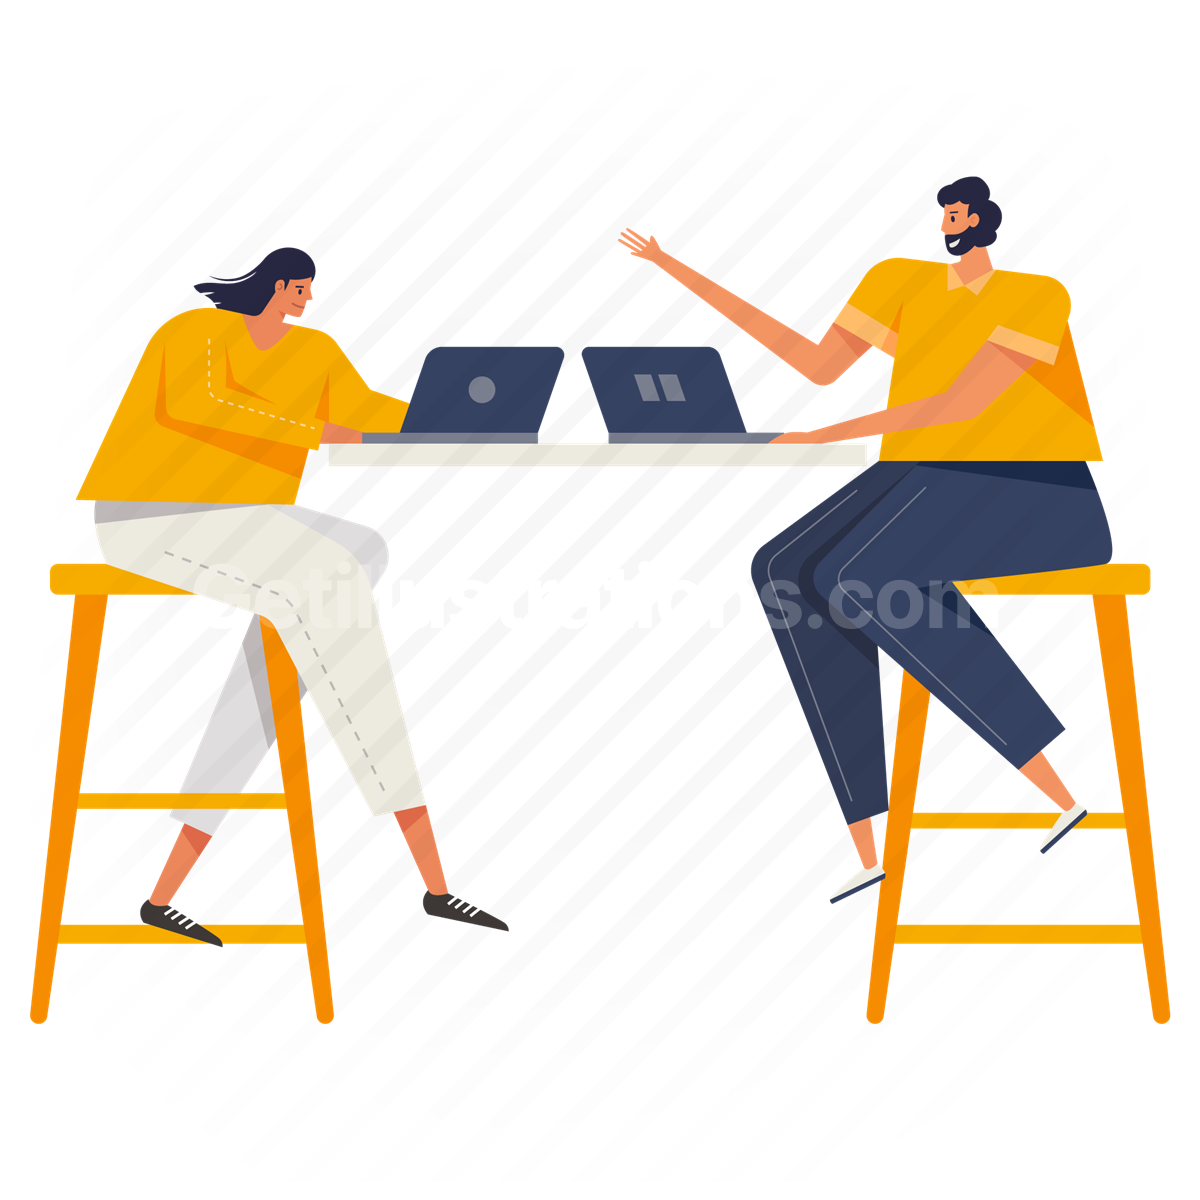 electronic, device, computer, laptop, table, collaboration, working together